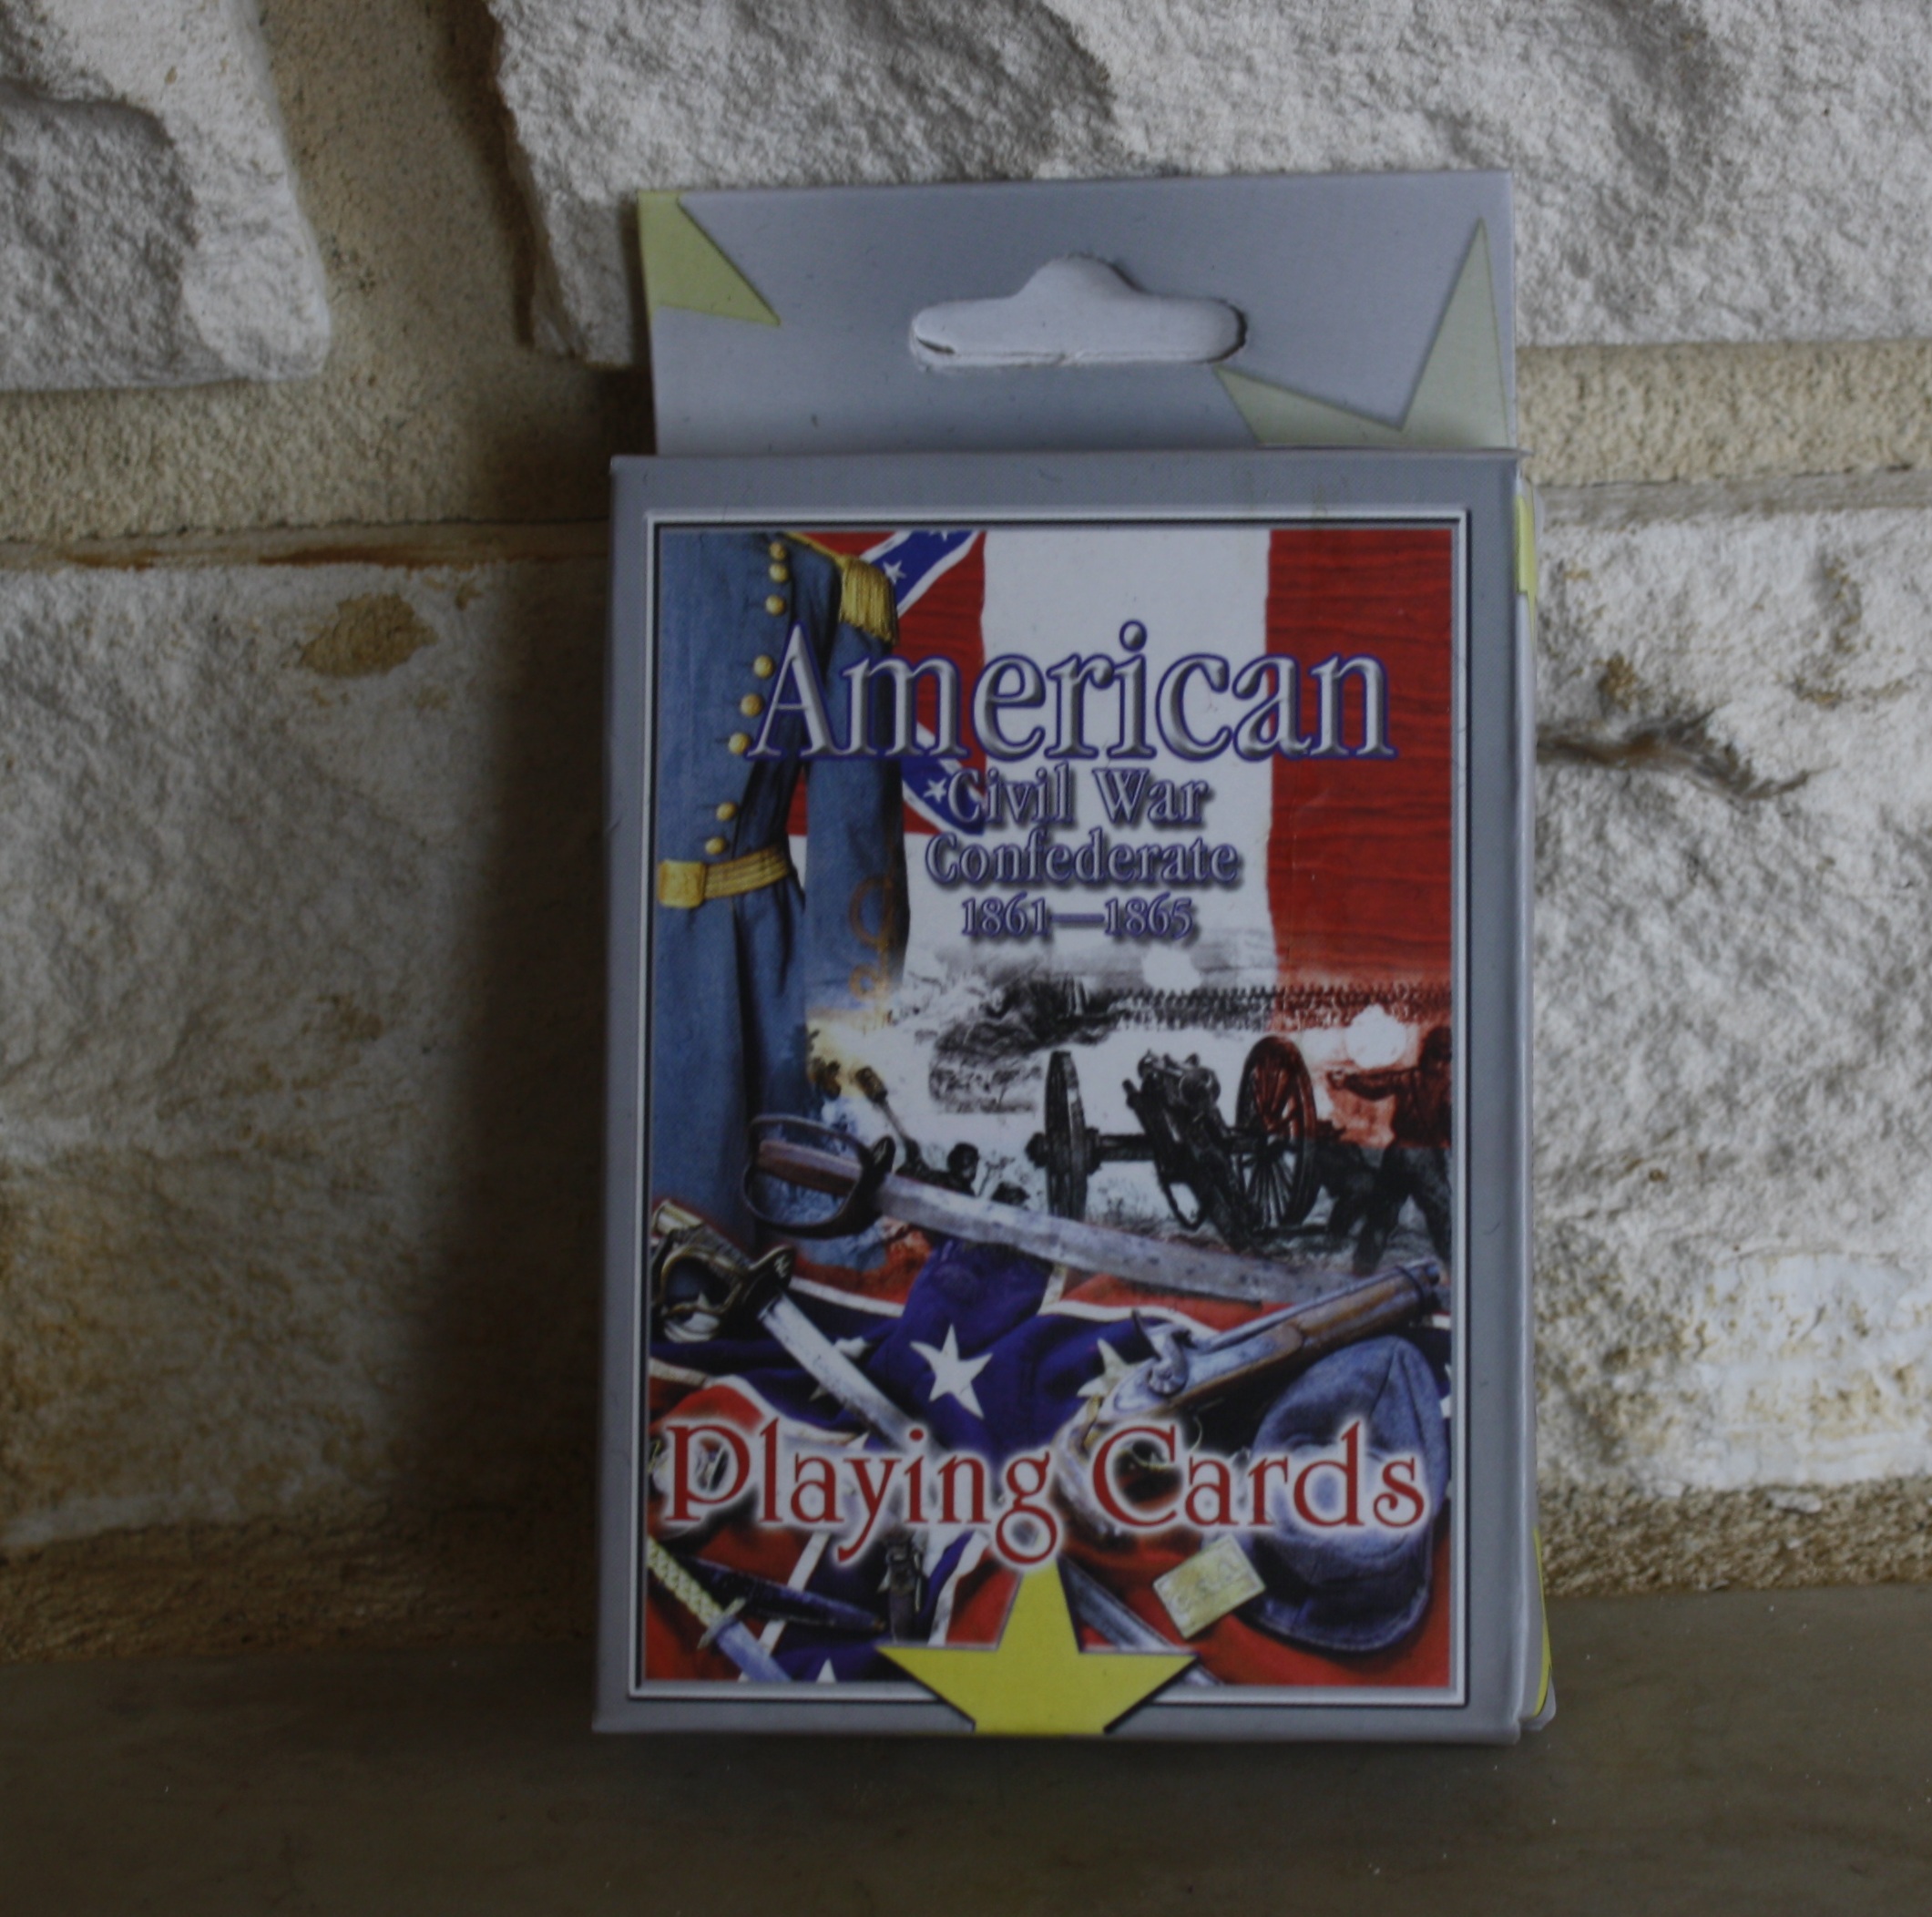 American Civil War Confederate Playing Cards